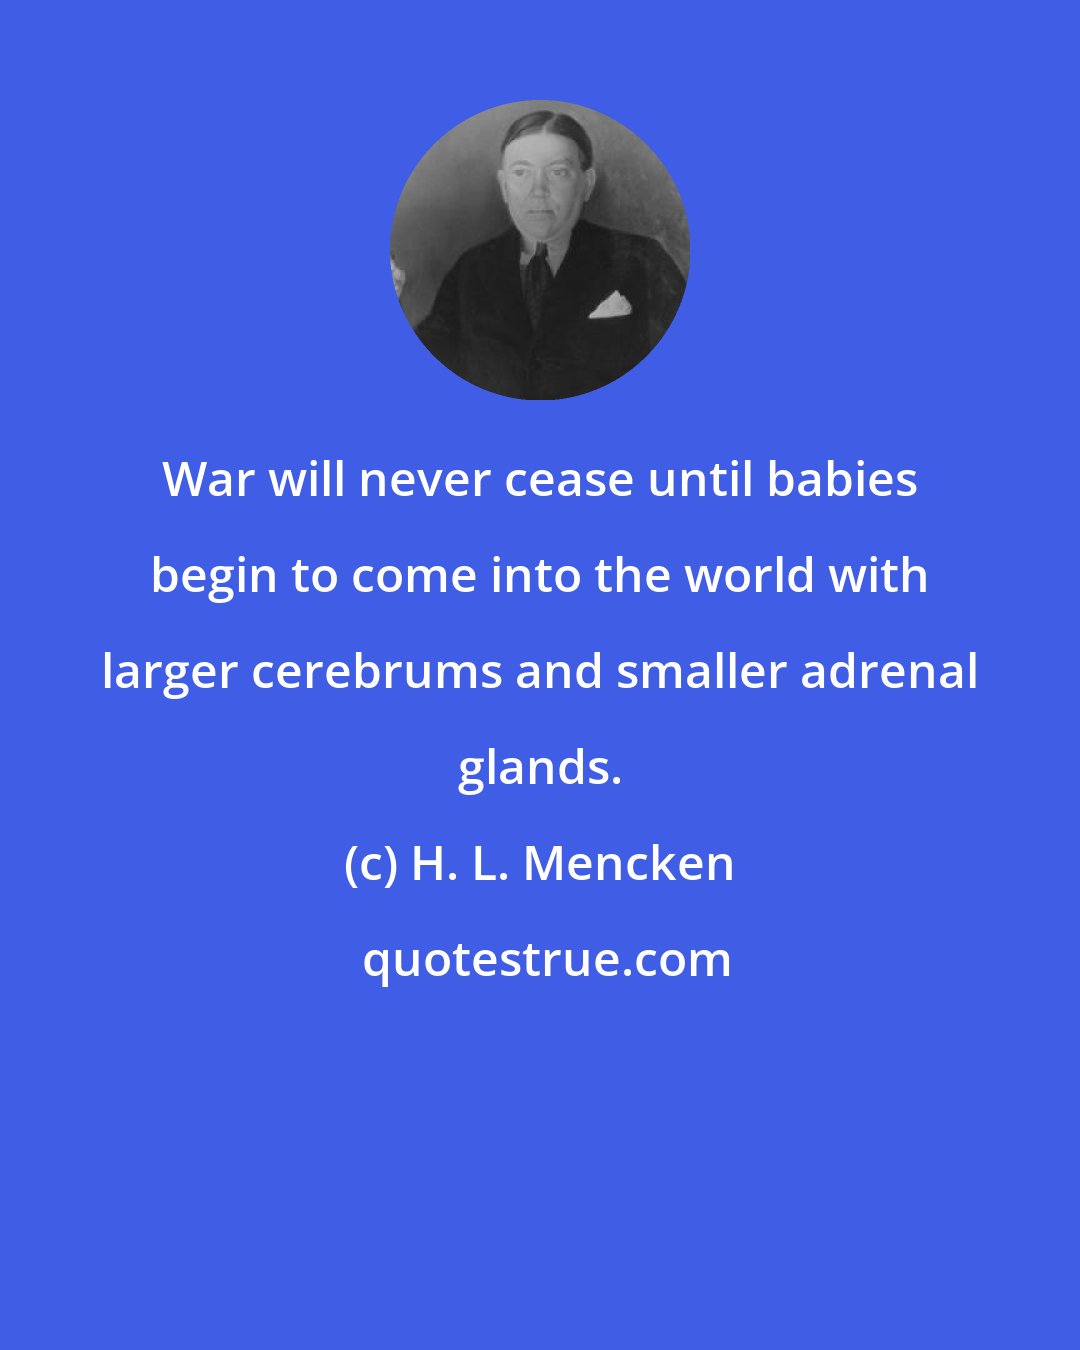 H. L. Mencken: War will never cease until babies begin to come into the world with larger cerebrums and smaller adrenal glands.